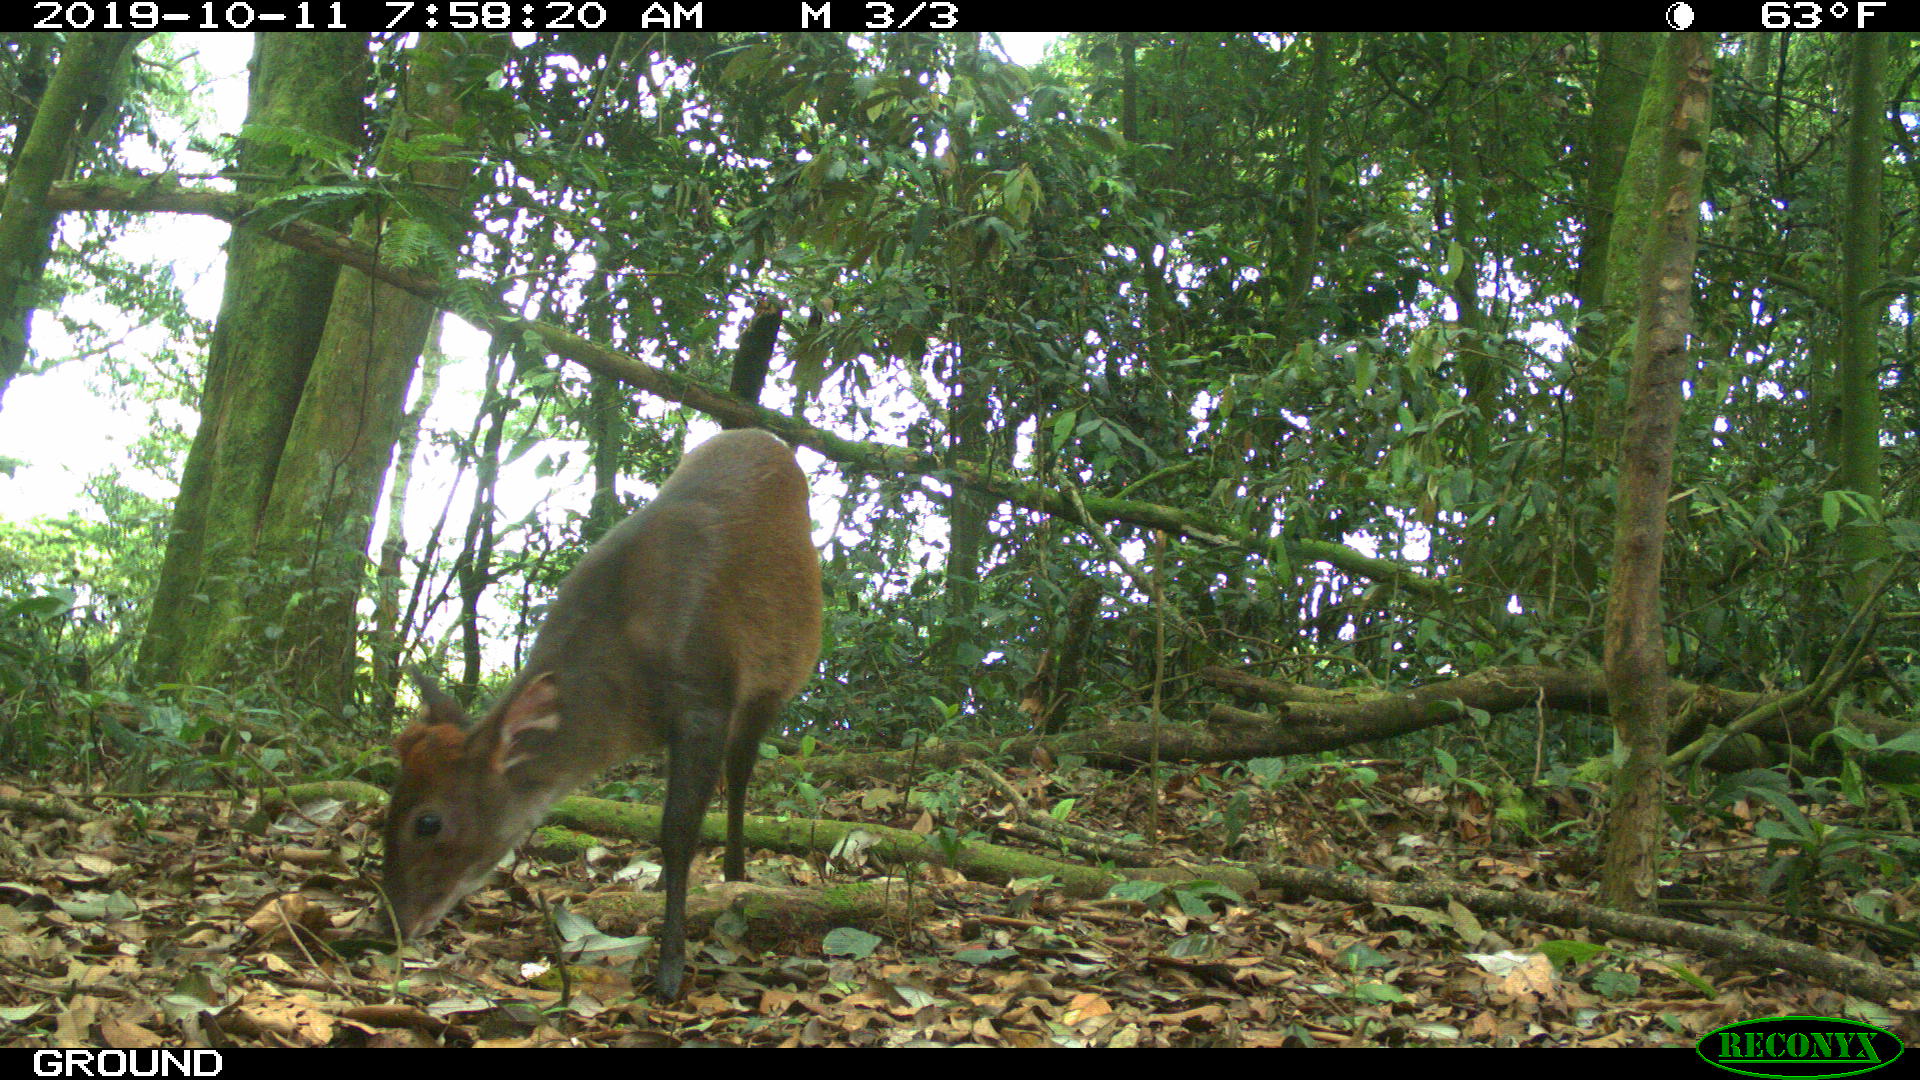 A photograph shows a small brown antelope nosing through brown leaves and green undergrowth on a forest floor. Information around the border of the photo shows it was taken at 7:58 a.m. on Oct. 11, 2019, when it was 63 degrees Fahrenheit. The camera was located on the ground and was made by Reconyx.